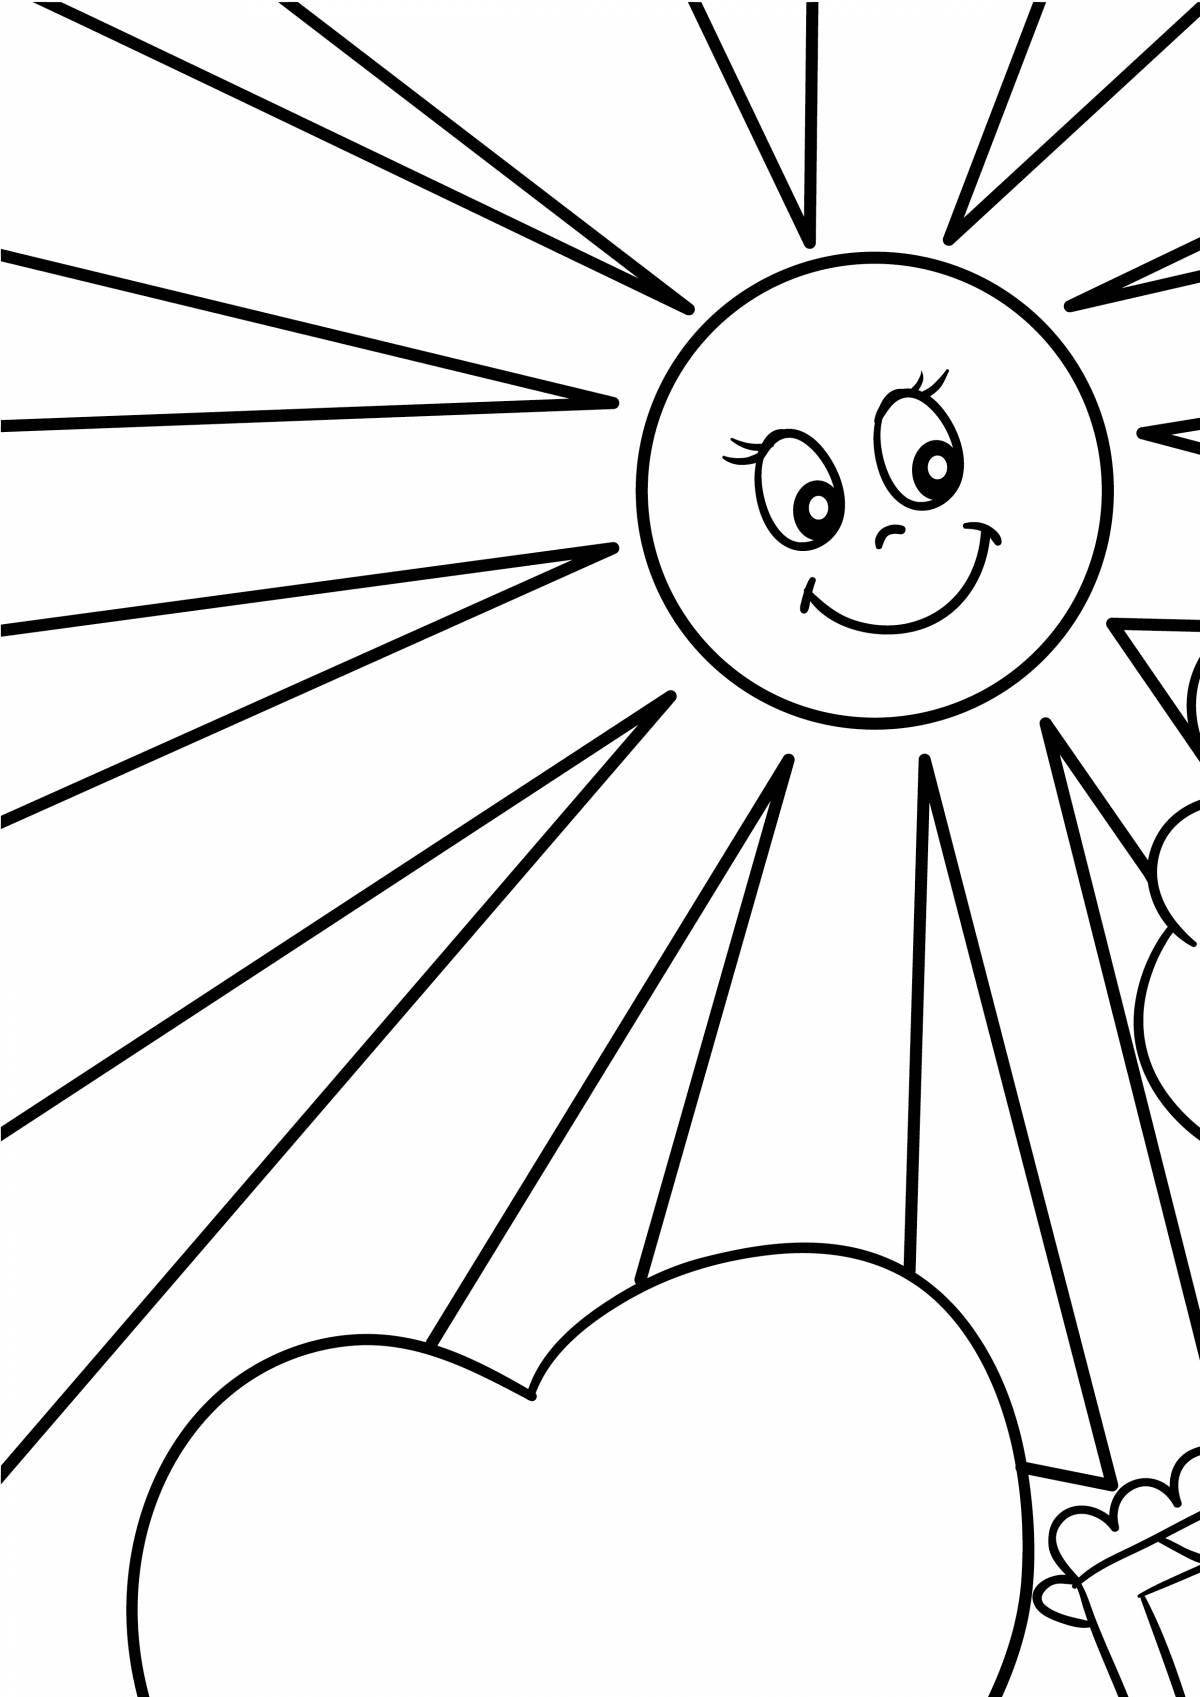 Brilliant coloring of the sun with a smile